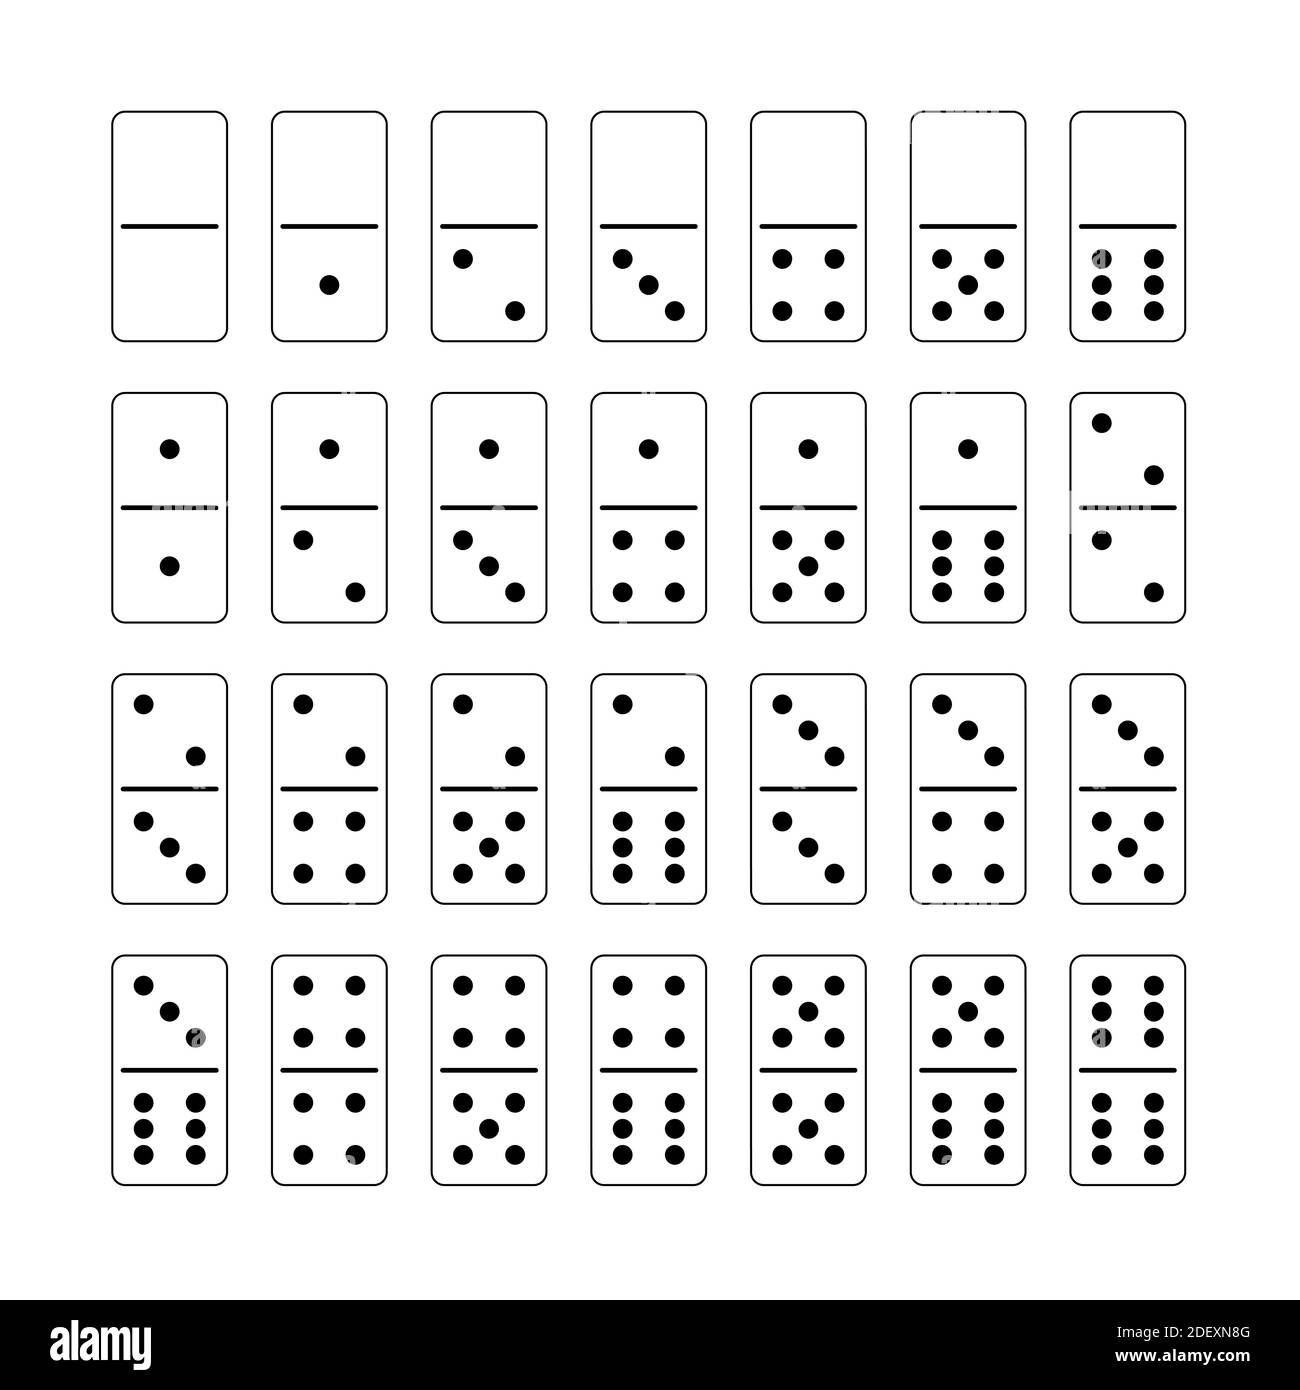 Domino set. Complete assorted game, collection of 28 arranged white tiles with black dots - outline illustration on white background. Stock Photo